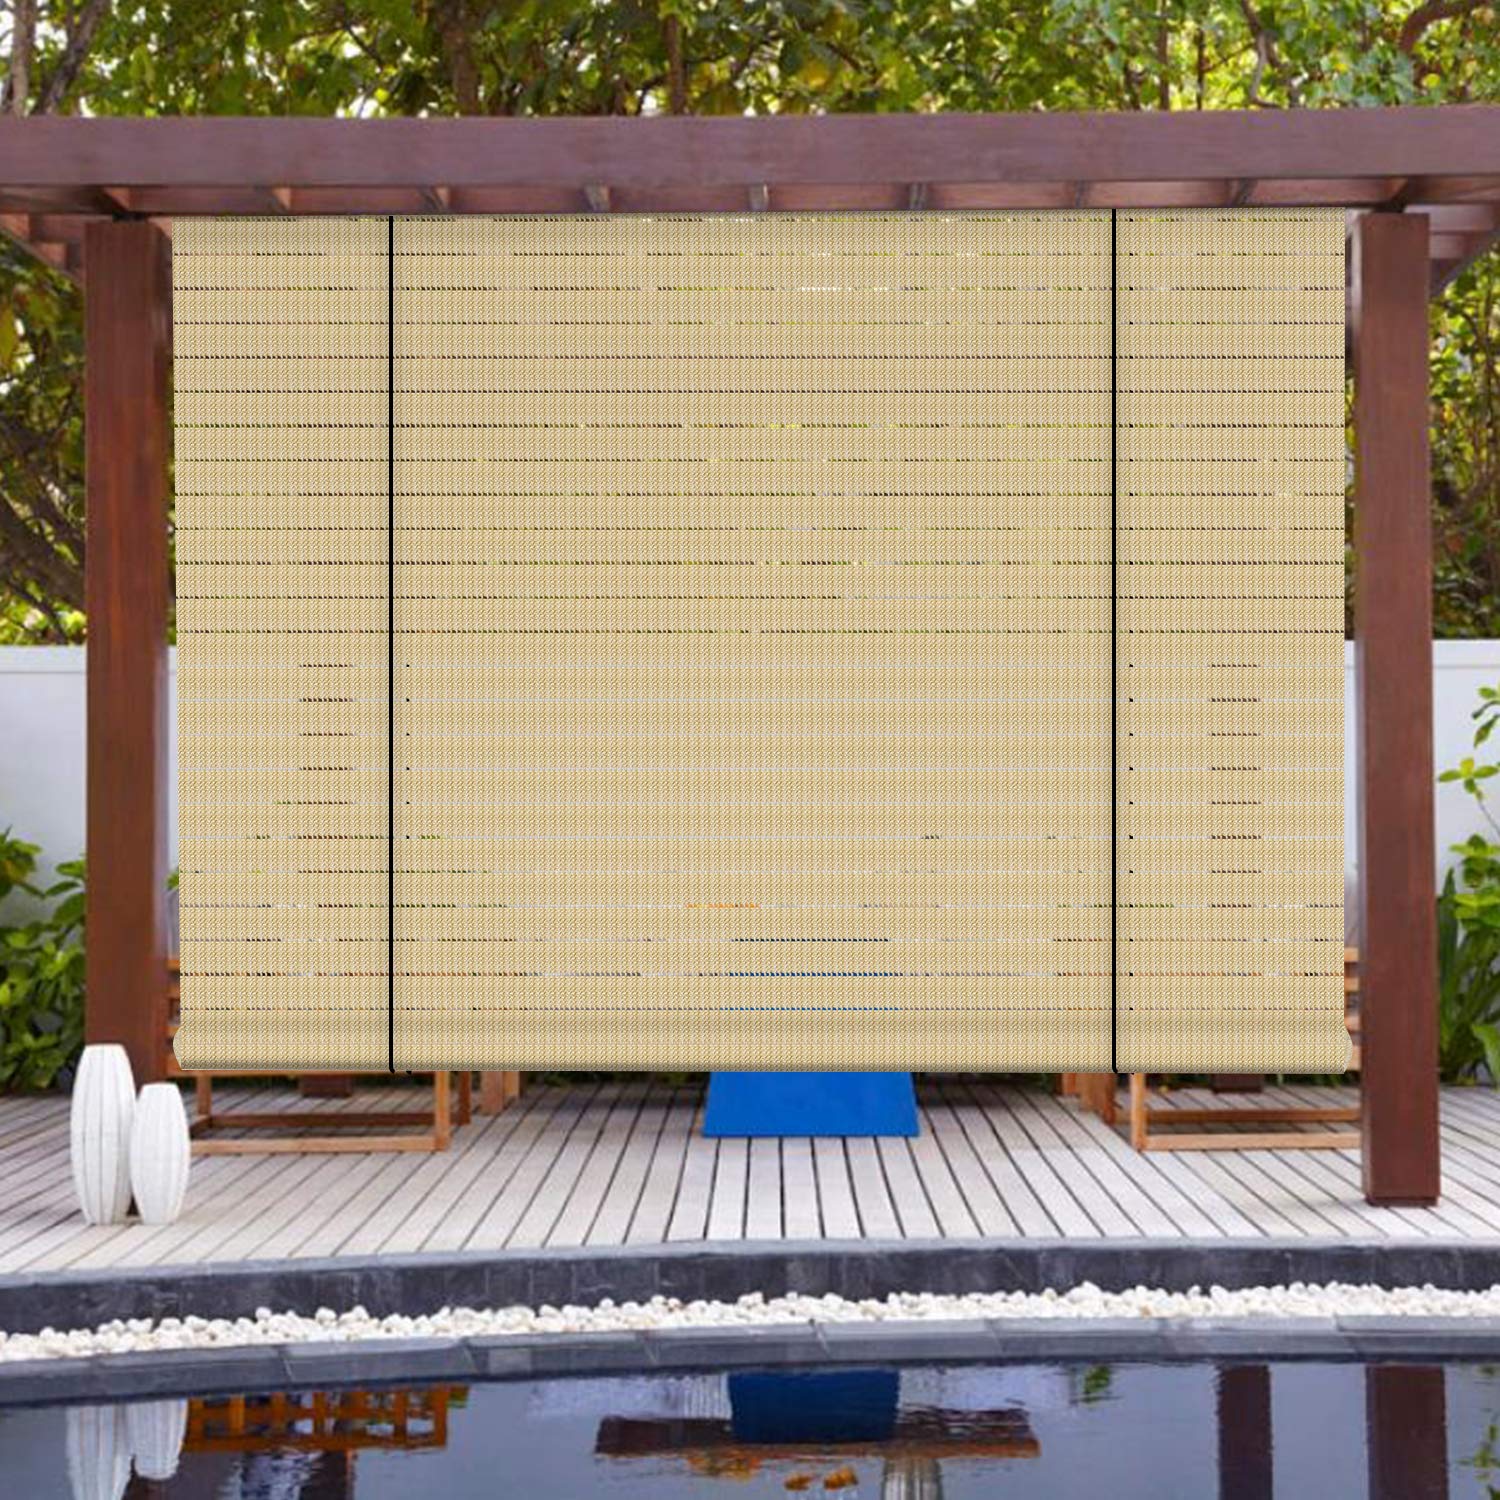 Patio Paradise Exterior Outdoor Roll Up Shades Blinds Roller Shade For Porch Deck Balcony Pergola Carport Light Filtering 4Wx75H